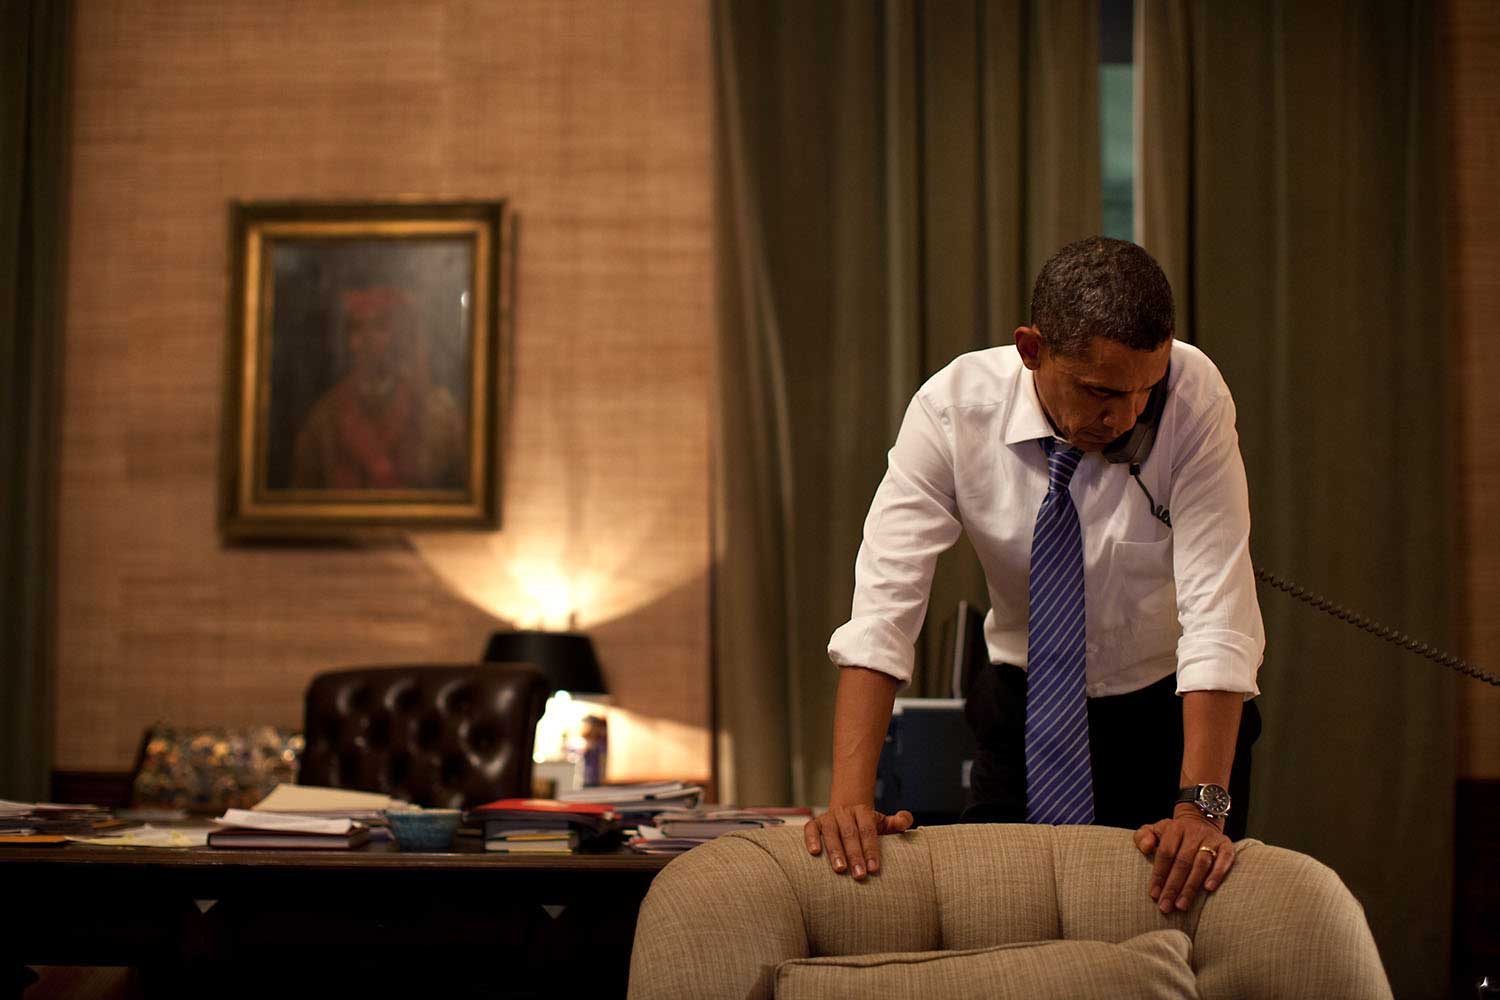 Late at night in the Treaty Room office in the White House residence, Nov. 23, 2010, the President talks on the phone with President Lee Myung-bak of South Korea after North Korea had conducted an artillery attack against the South Korean island of Yeonpyeong.